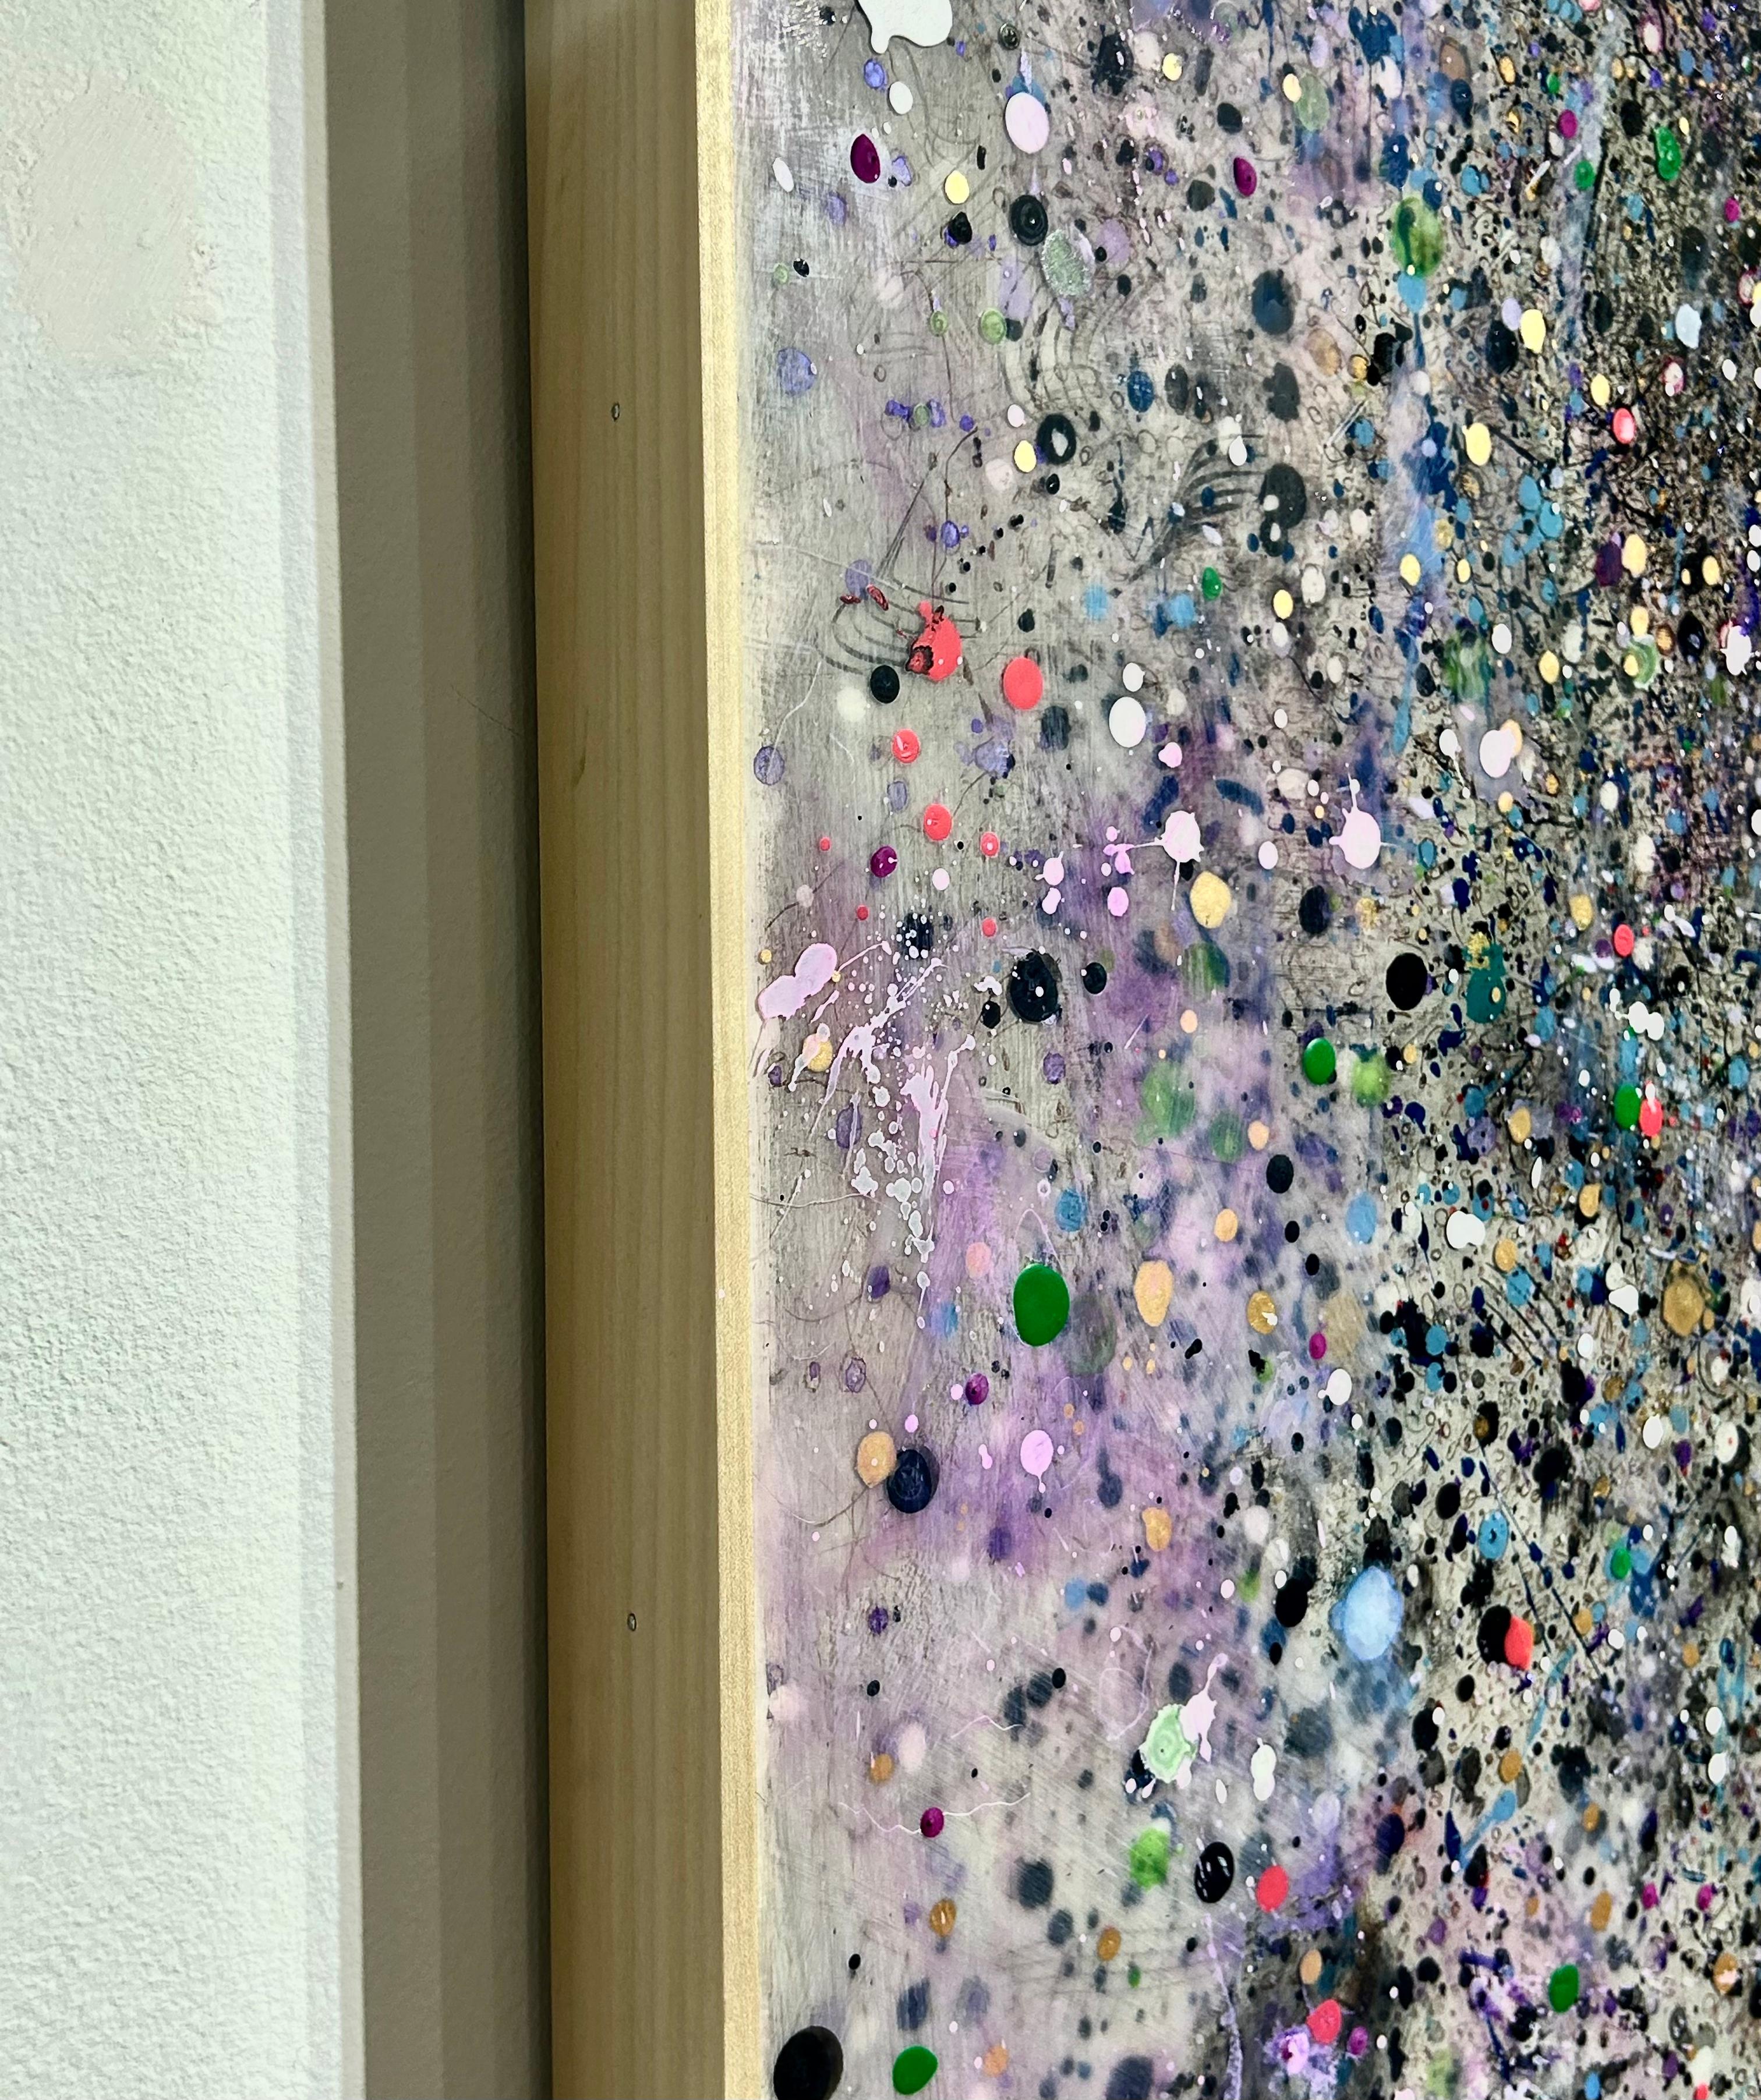 Abstract art experiments with the use of texture, tone, and light perception. Through abstract works, the artist expresses her feelings rather than particular objects or scenes.  With Suk Ja Kang's work, the viewer experiences a sense of wonder and